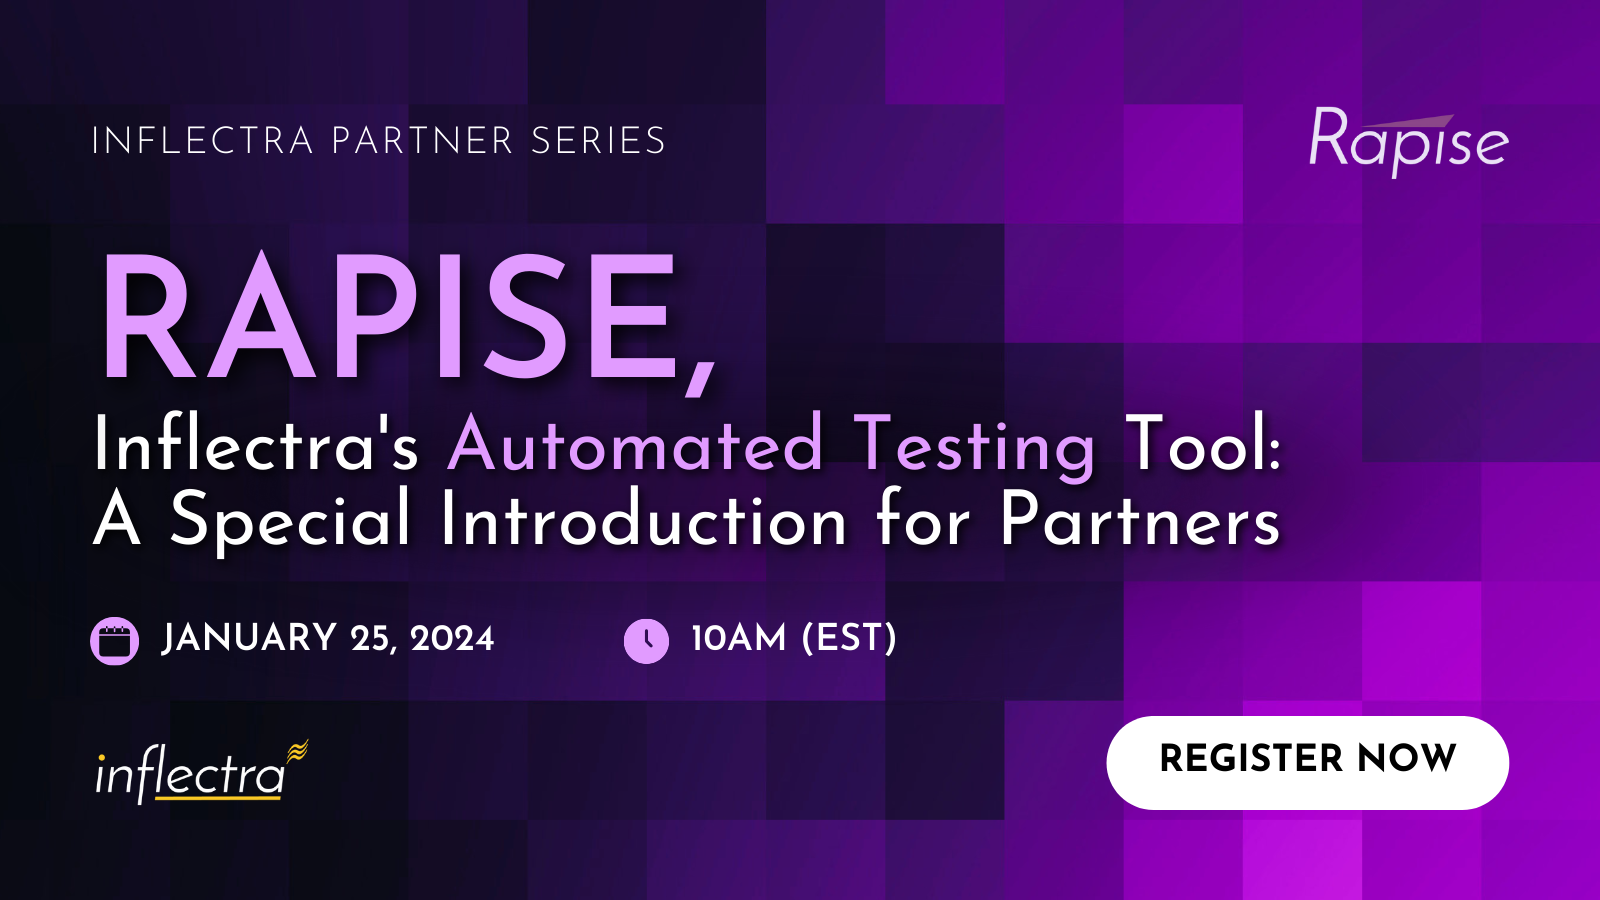 inflectra-partner-series-rapise-inflectra-automated-testing-tool-a-special-introduction-for-partners-on-january-twenty-fifth-image